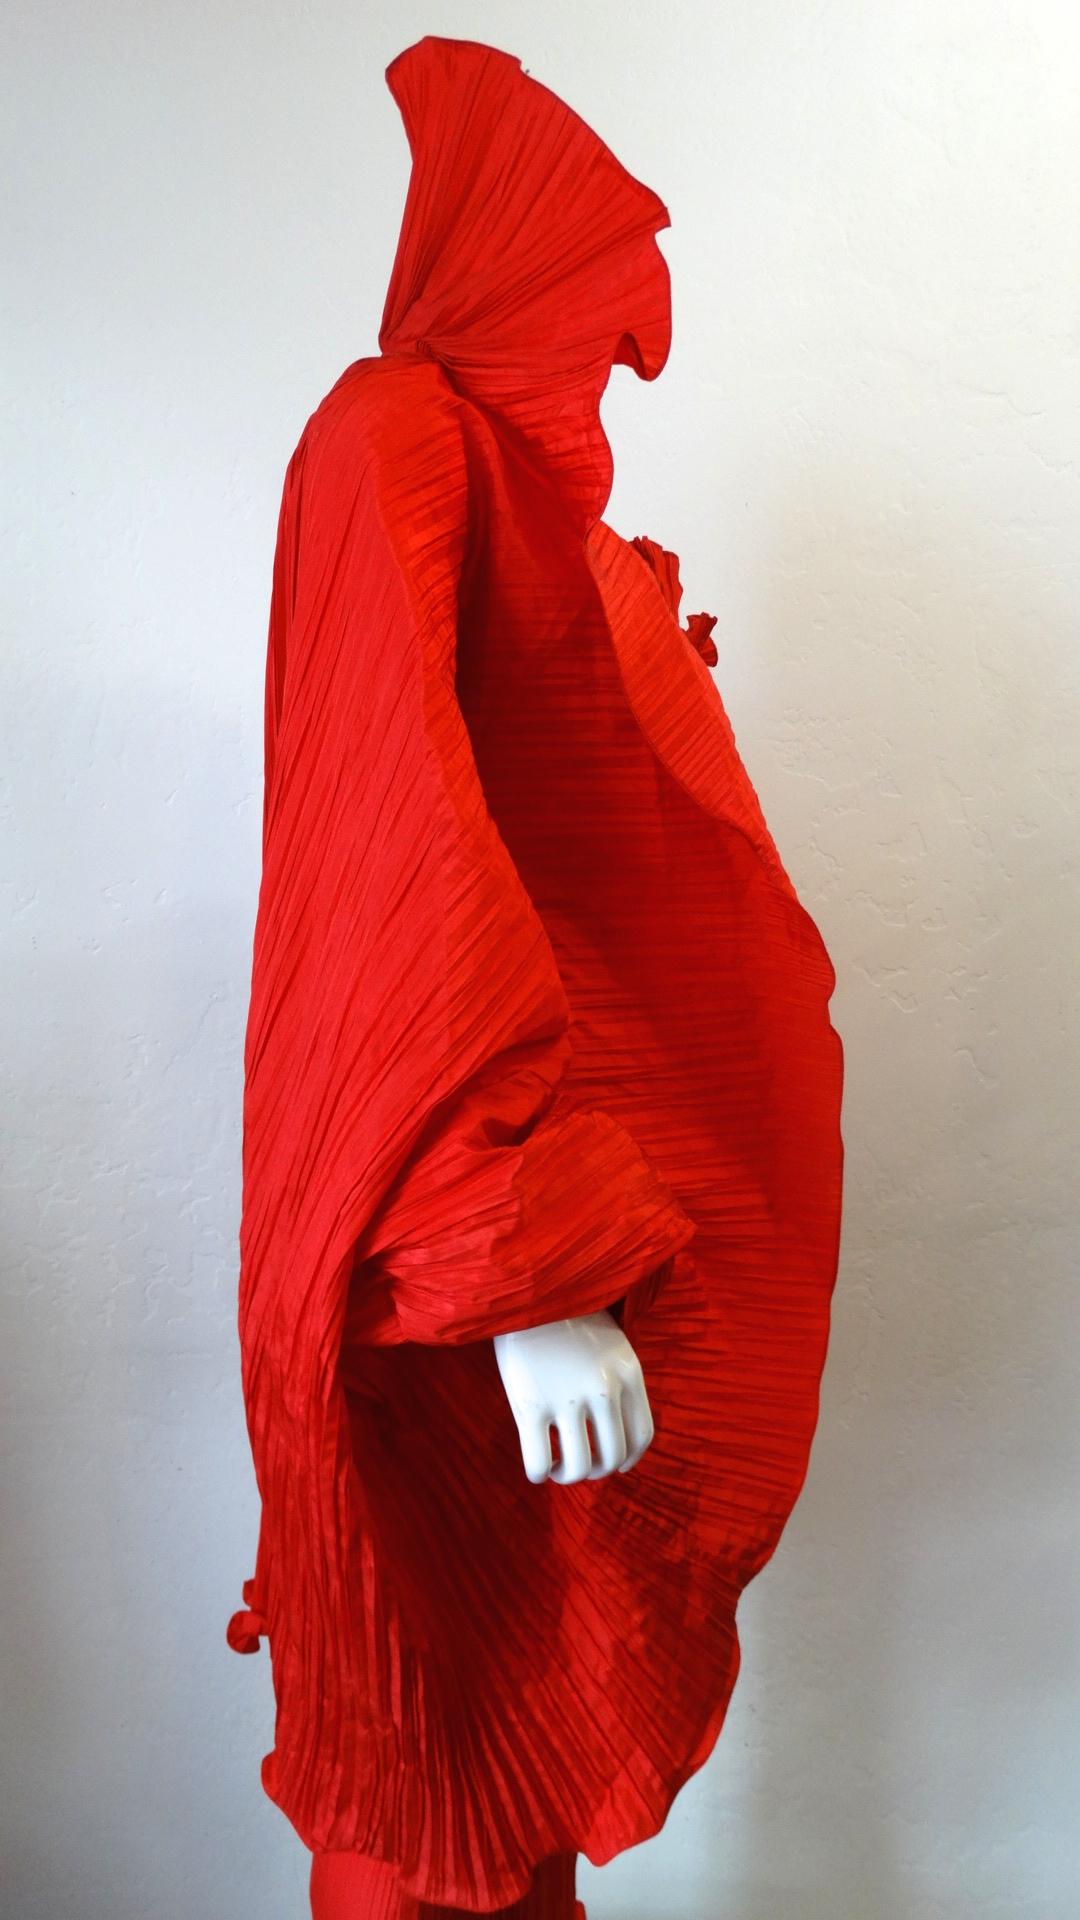 Make A Statement With This Amazing Piece! Circa late 1980s, this incredible Bernard Perris vibrant red pleated silk crepe cape features an extravagant Elizabethan high standing collar and a ruffled hem all throughout. The high standing collar